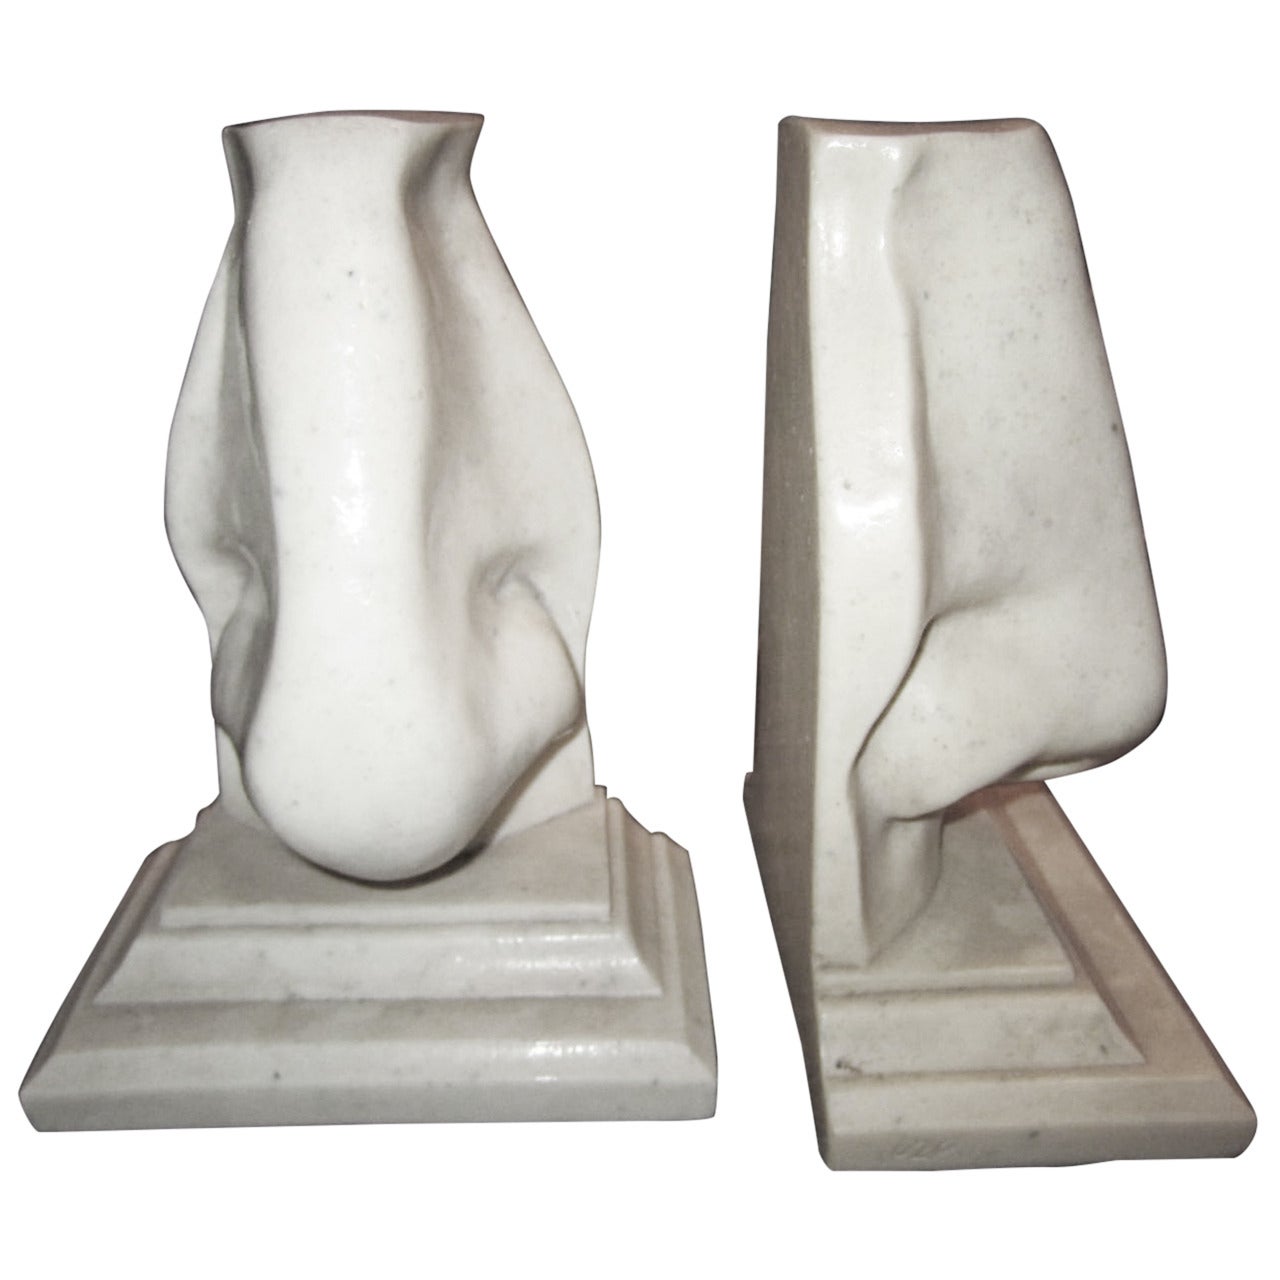 Unusual Pair of Italian Mid-Century Modern Oversized Nose Bookends For Sale